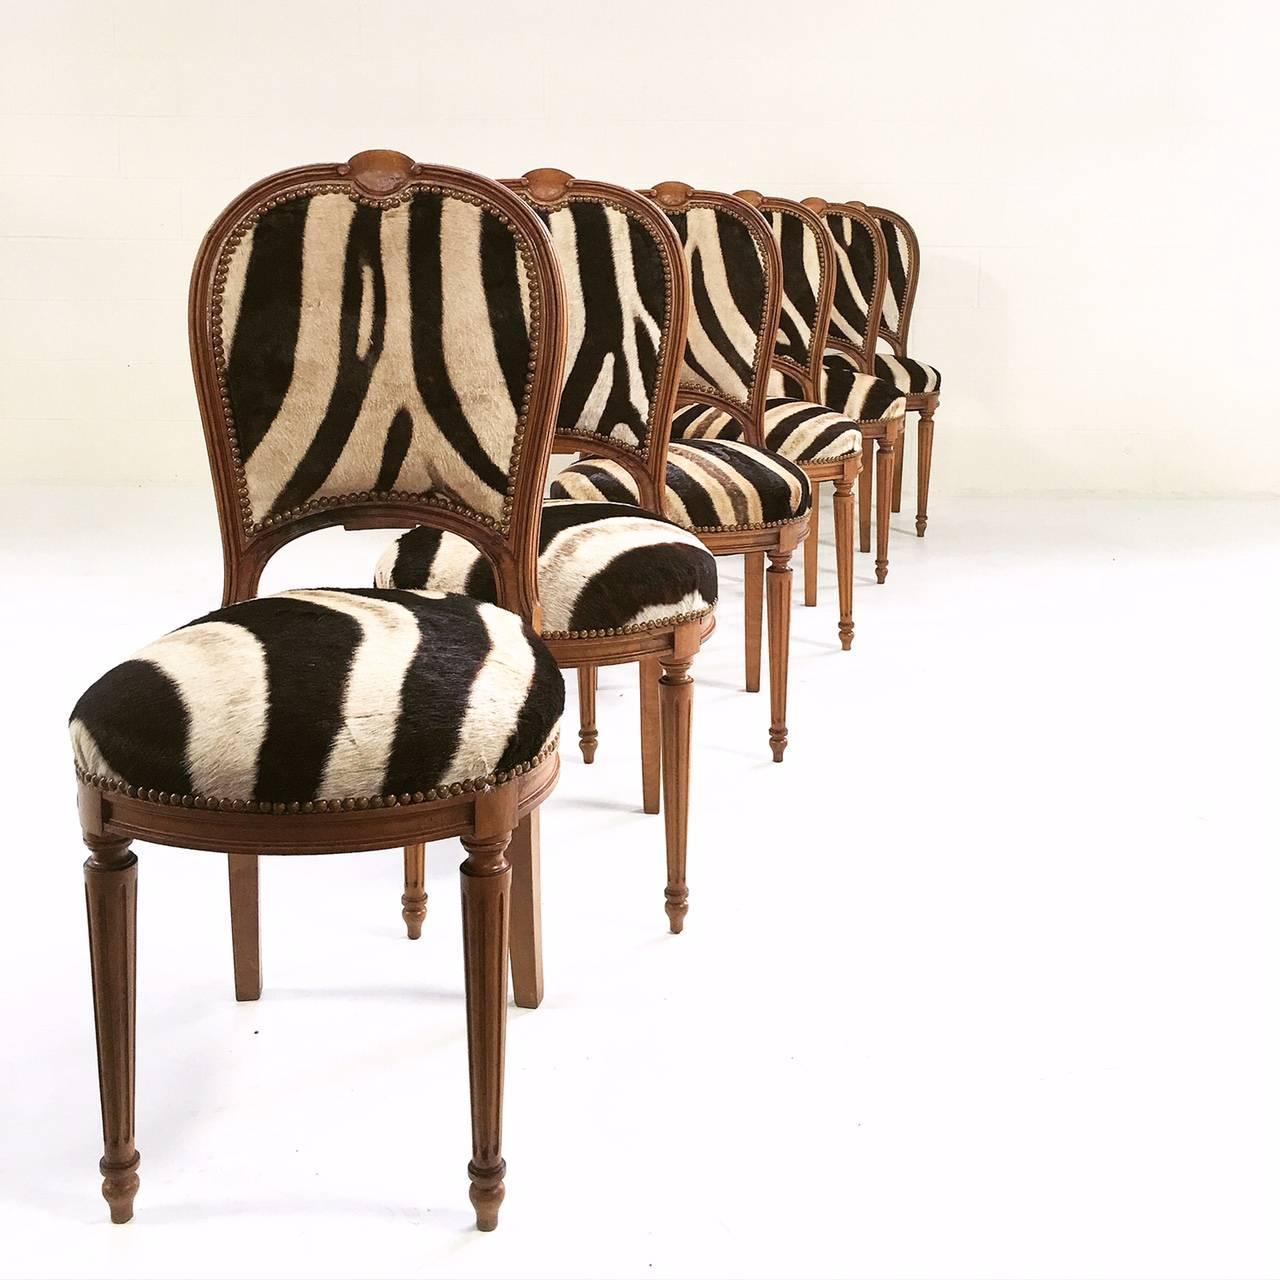 A finely constructed set of six Louis XVI style dining chairs by Maison Jansen. Beautiful tapered reeded legs support an apron with four box corners. New master upholstery in zebra hide looks stunning on the arch and curved back. Stylishly finished